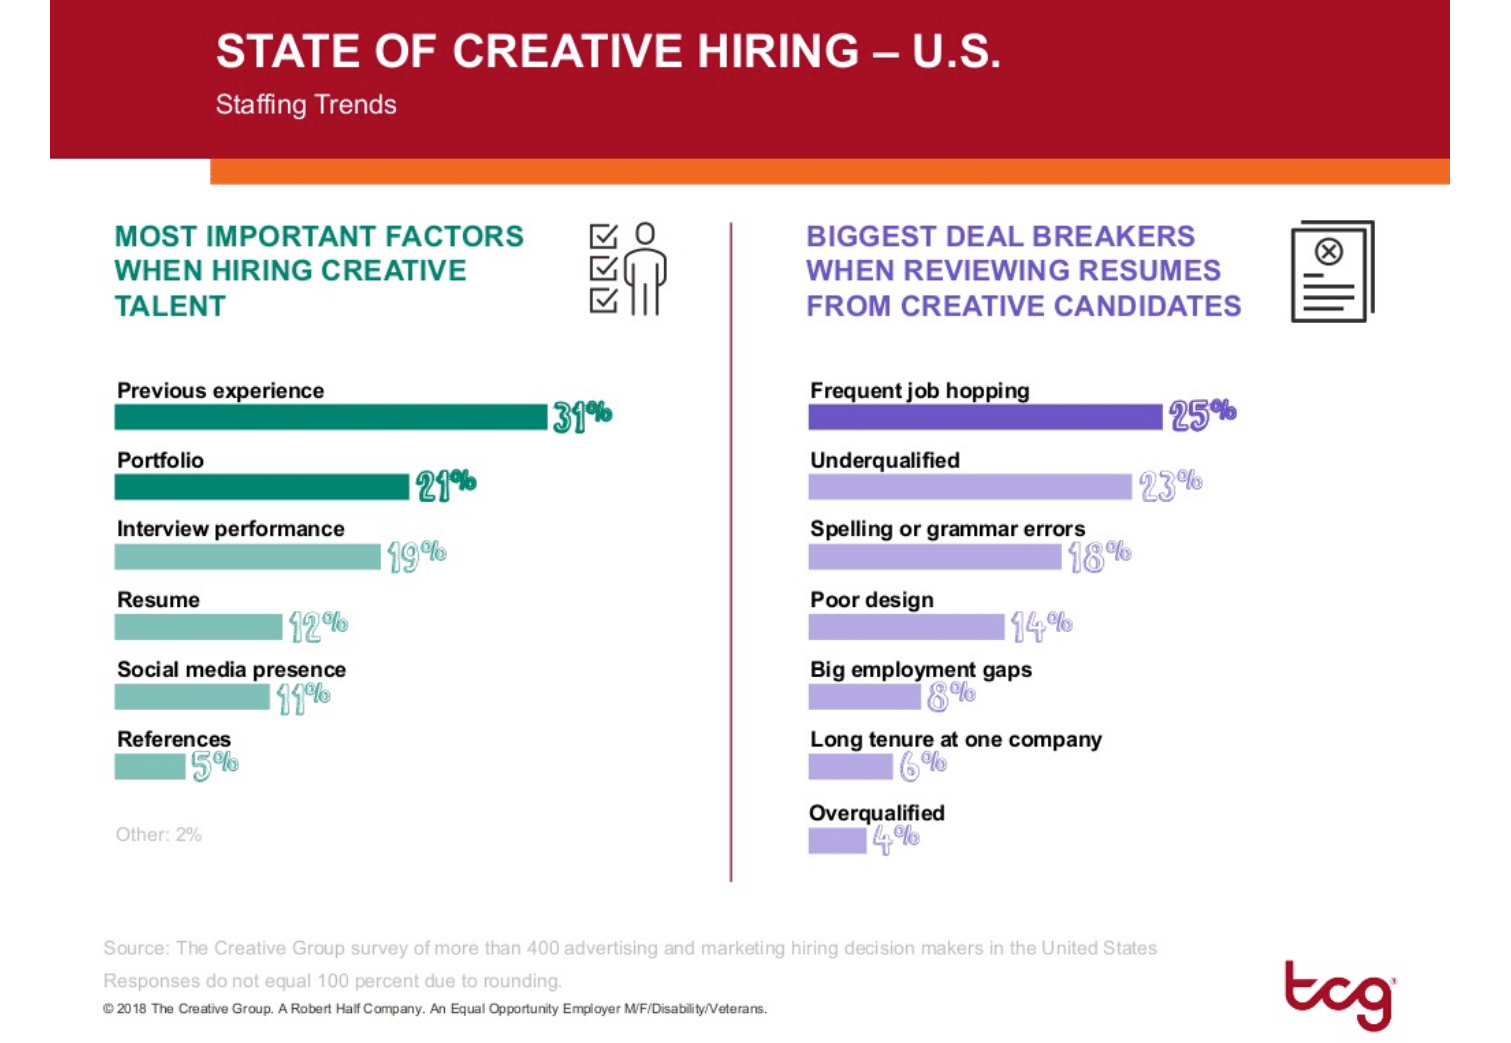 6 In 10 companies plan to expand creative teams in first half of 2019